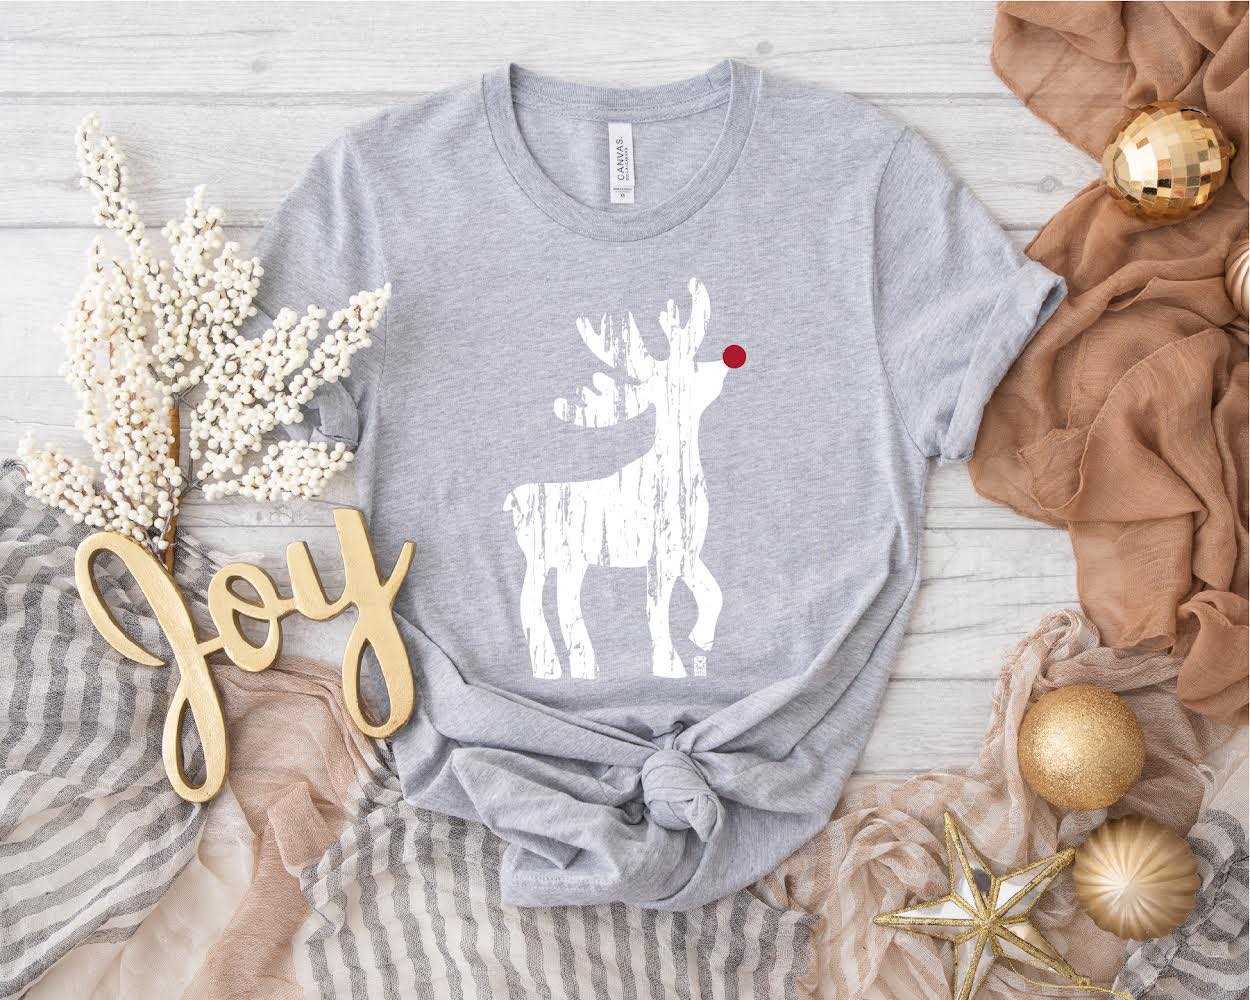 boutique shopping pensacola tee graphic t-shirt top clothing rudolph red nose reindeer grey christmas holiday seasonal festive